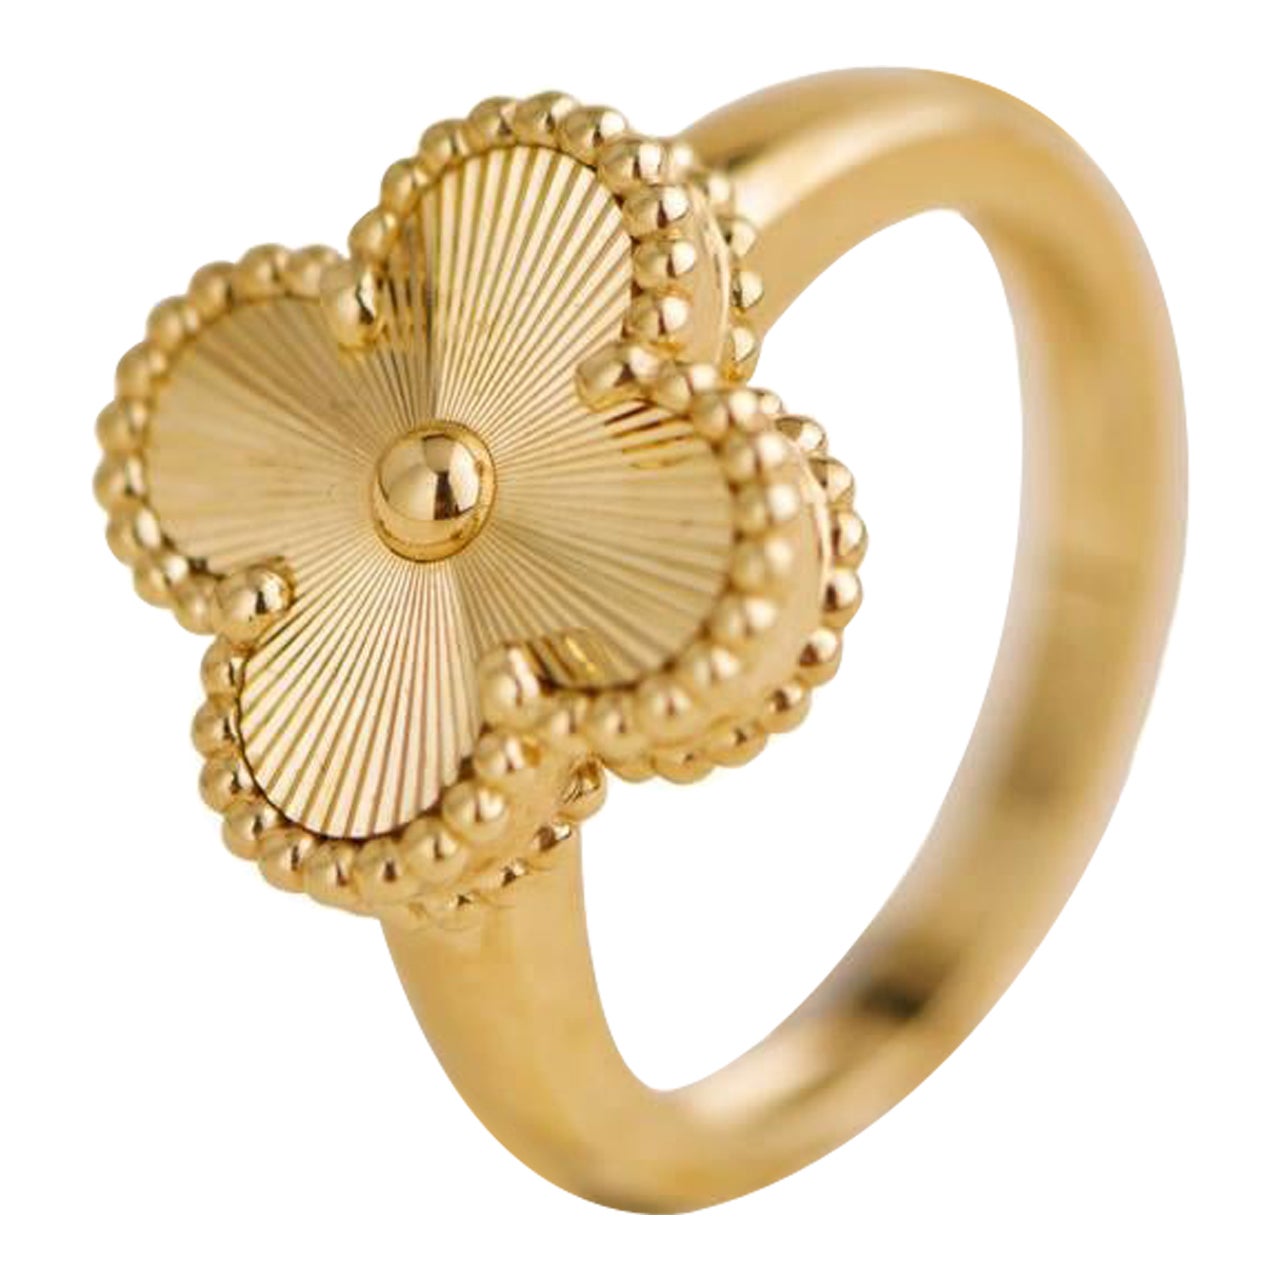 Van Cleef & Arpels Guilloché Alhambra 18k Yellow Gold Ring Size 54 For Sale